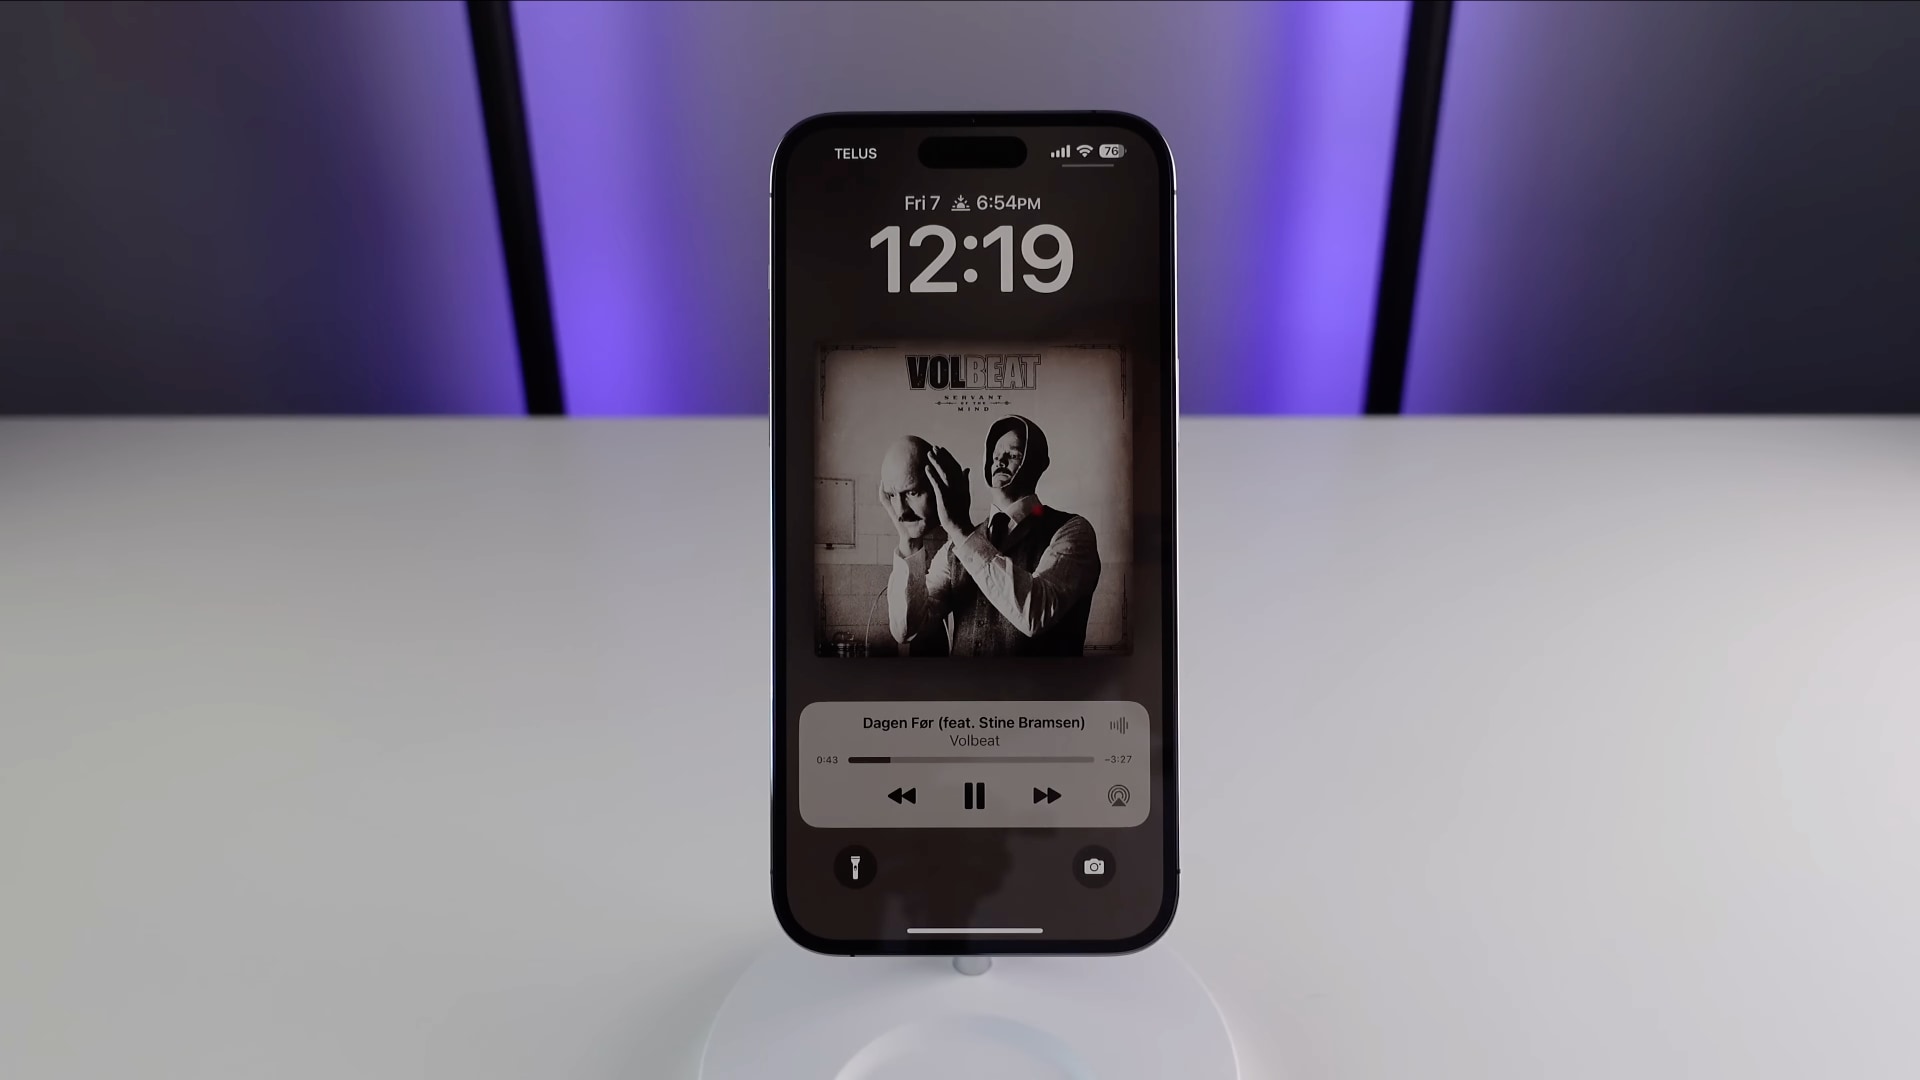 iPhone standing upright on a white table, showcasing fullscreen Now Playing controls on the lock screen